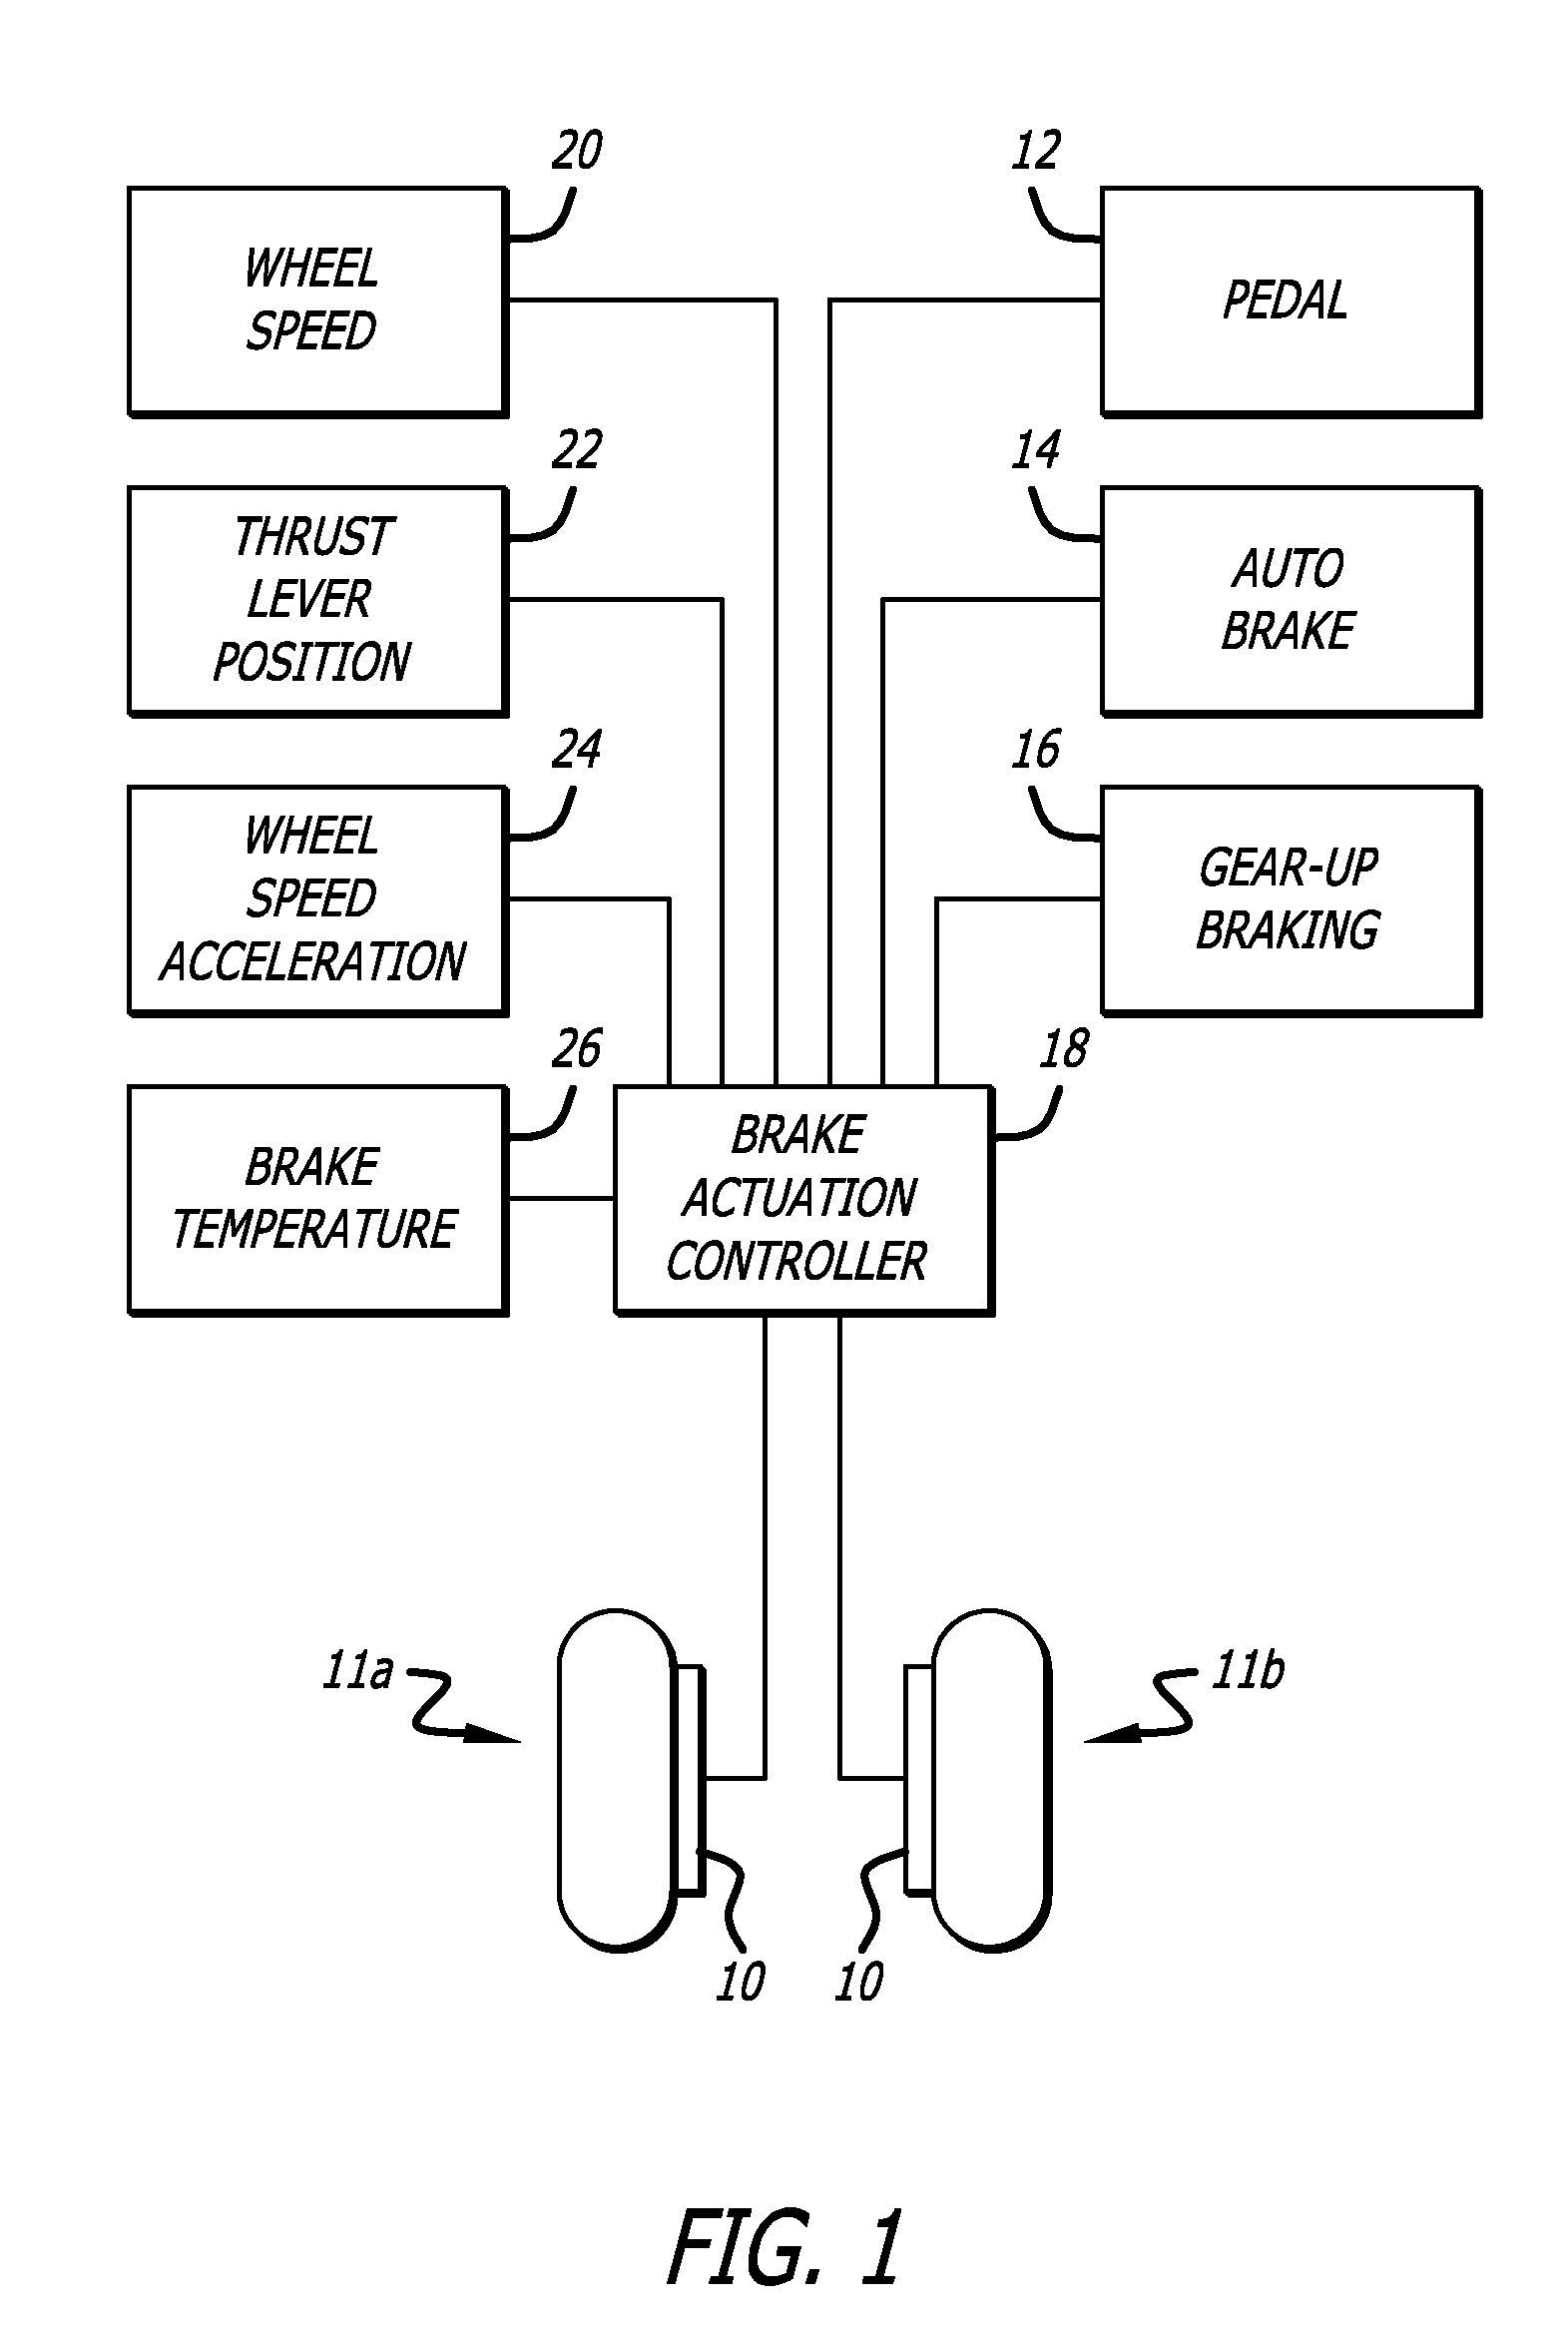 Method and system to increase electric brake clamping force accuracy